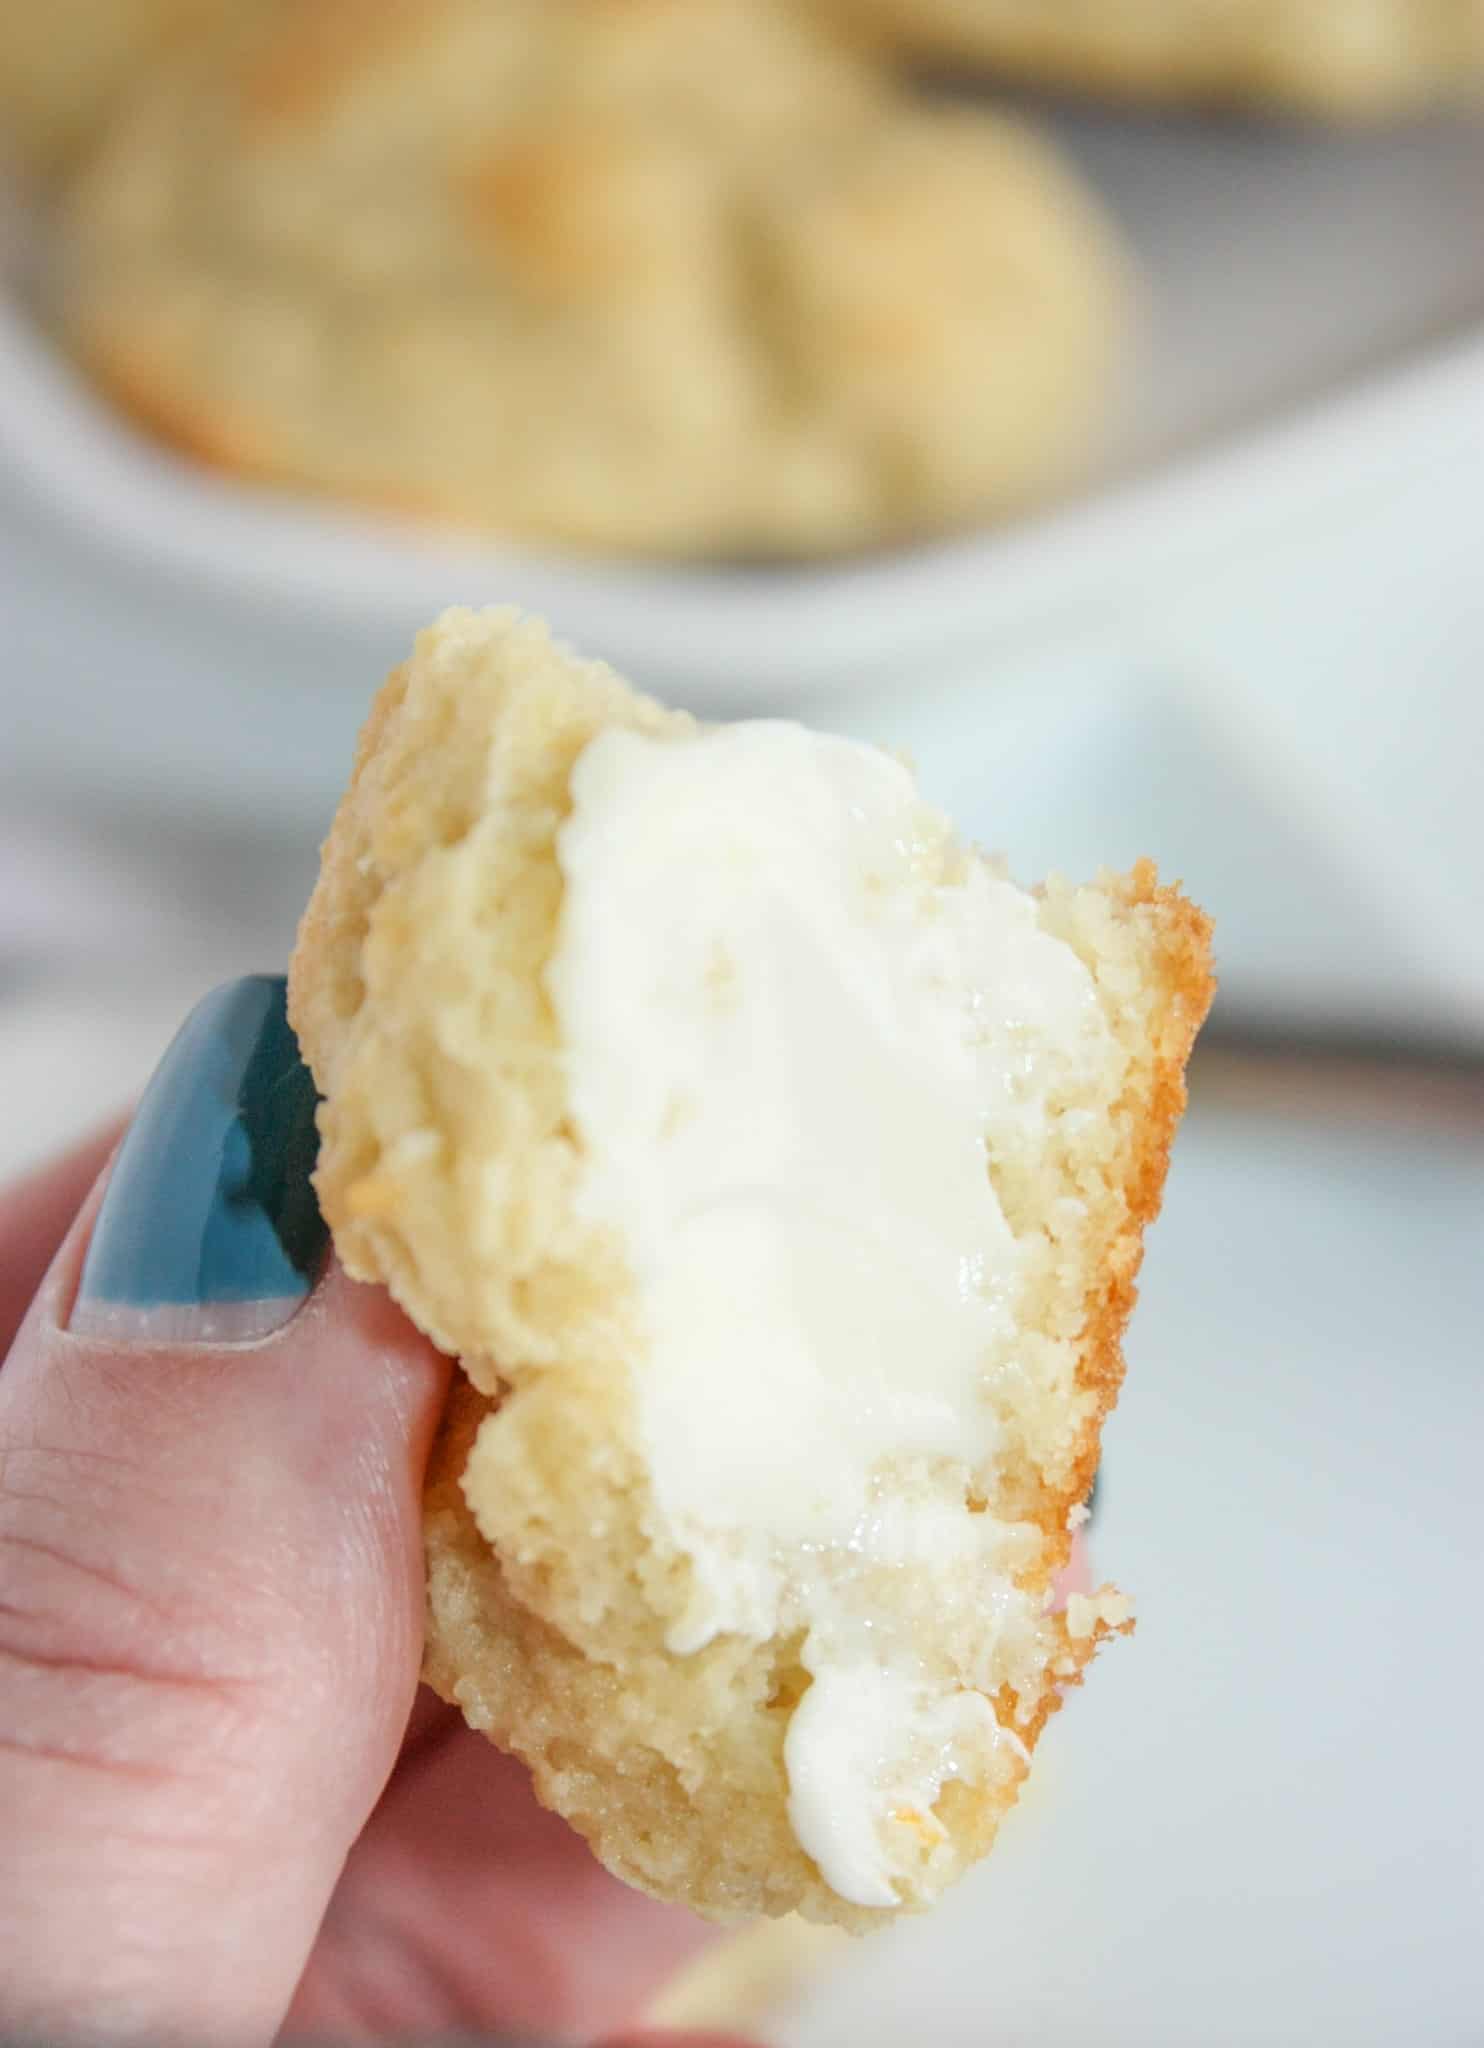 Looking for a quick gluten free biscuit recipe?  These Almond Flour Biscuits are the perfect choice.  This easy bread recipe makes a nice fluffy biscuit.